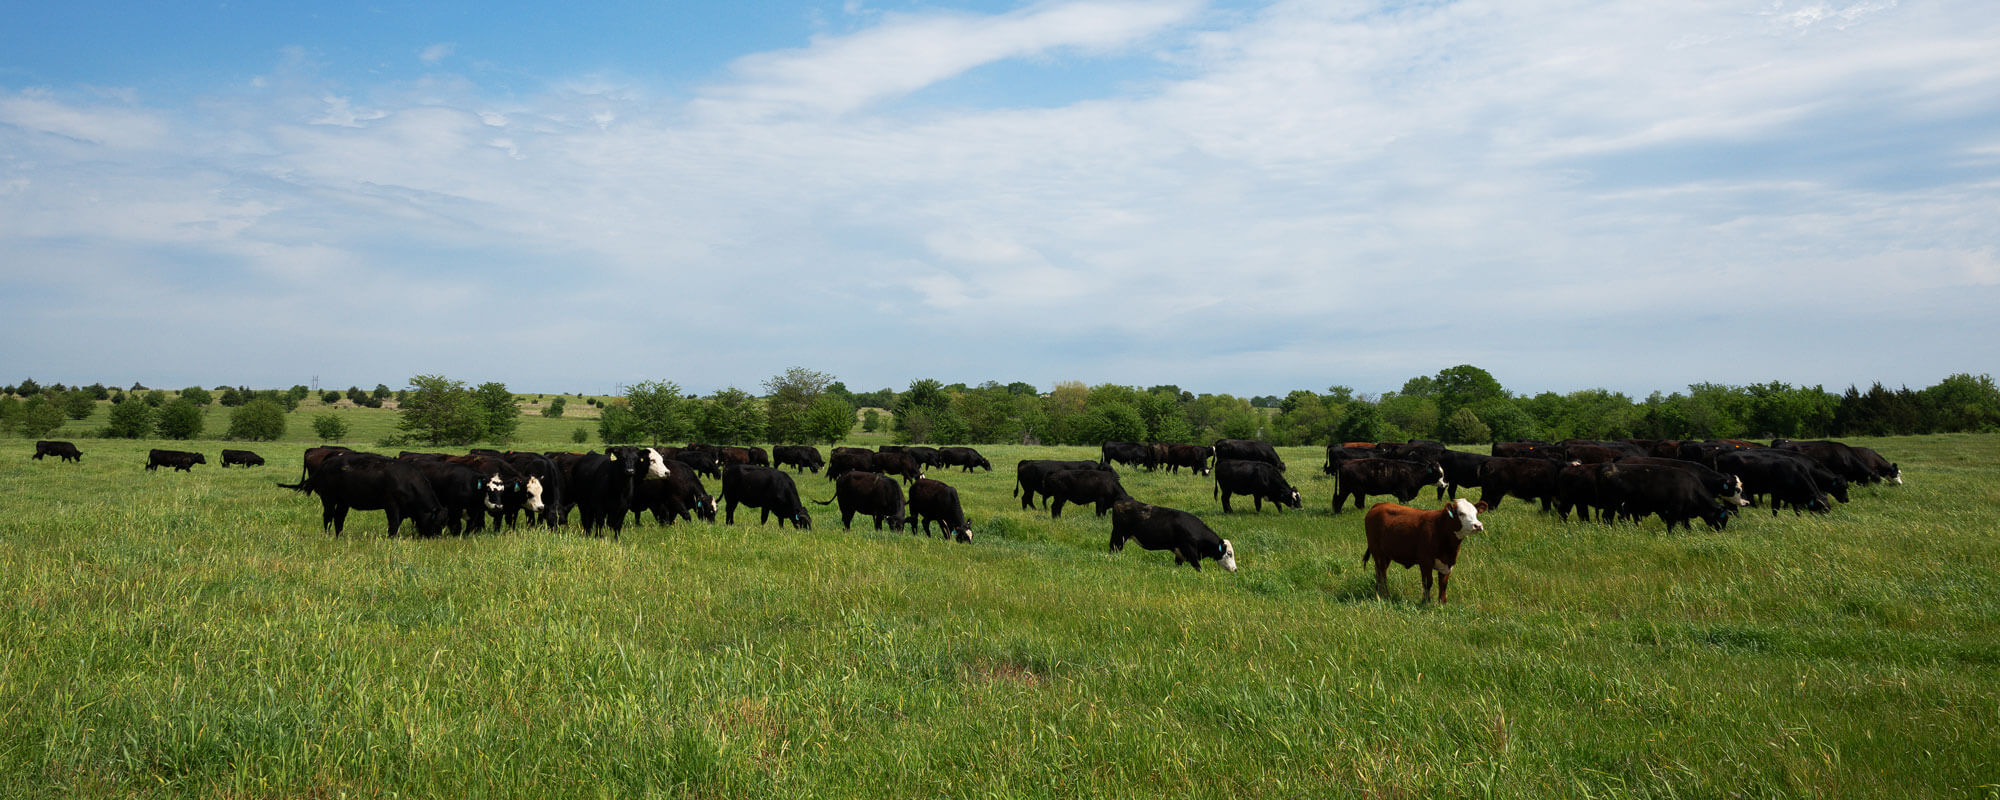 The Great American Grazing Lands